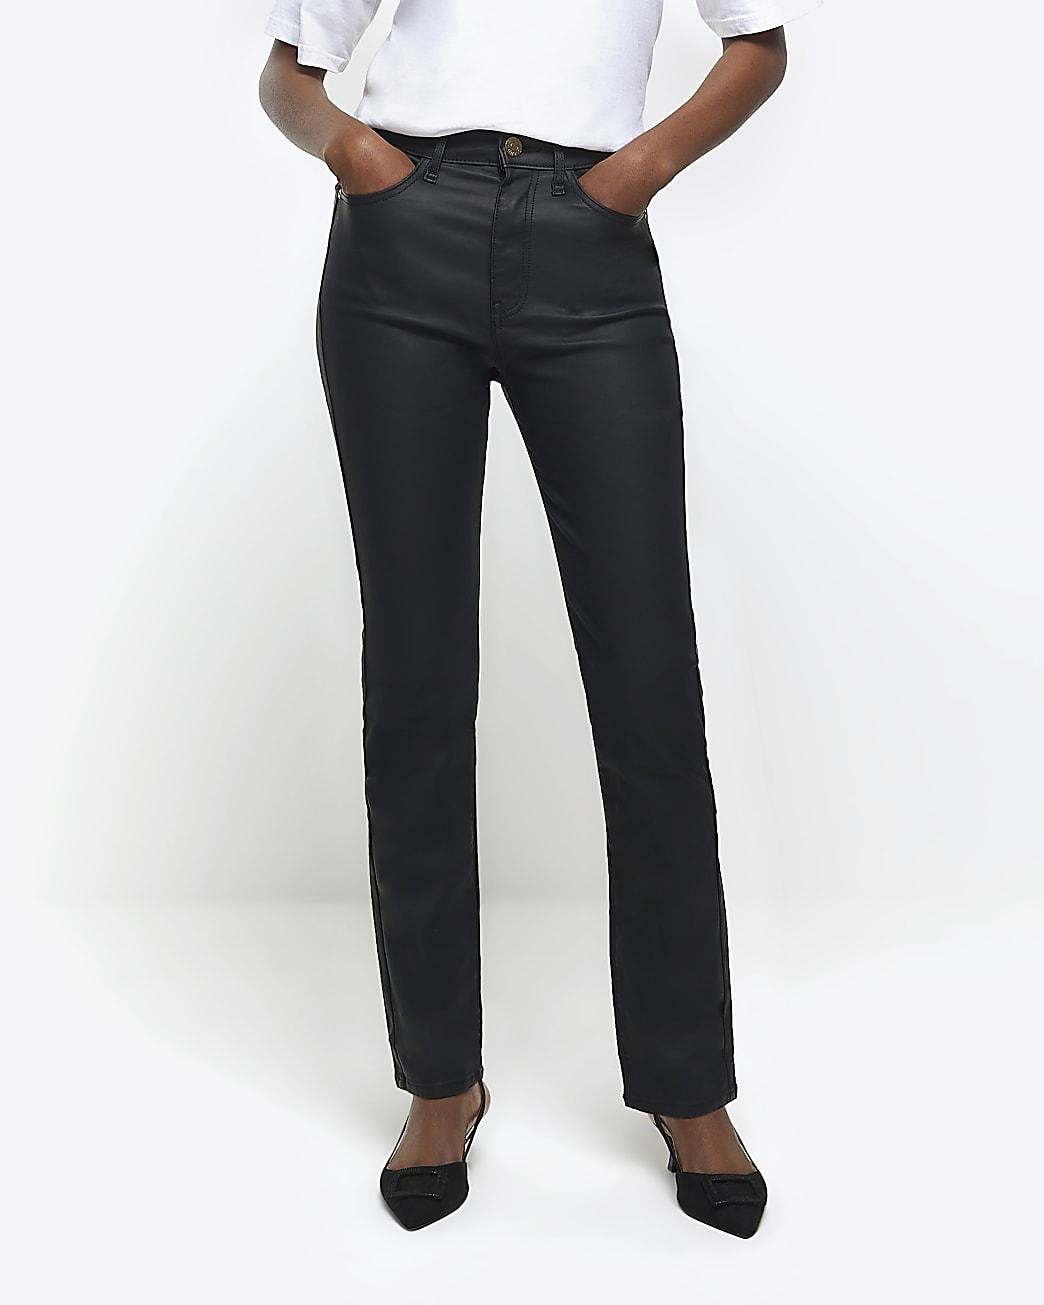 River Island Black High Waisted Slim Coated Jeans | Lyst